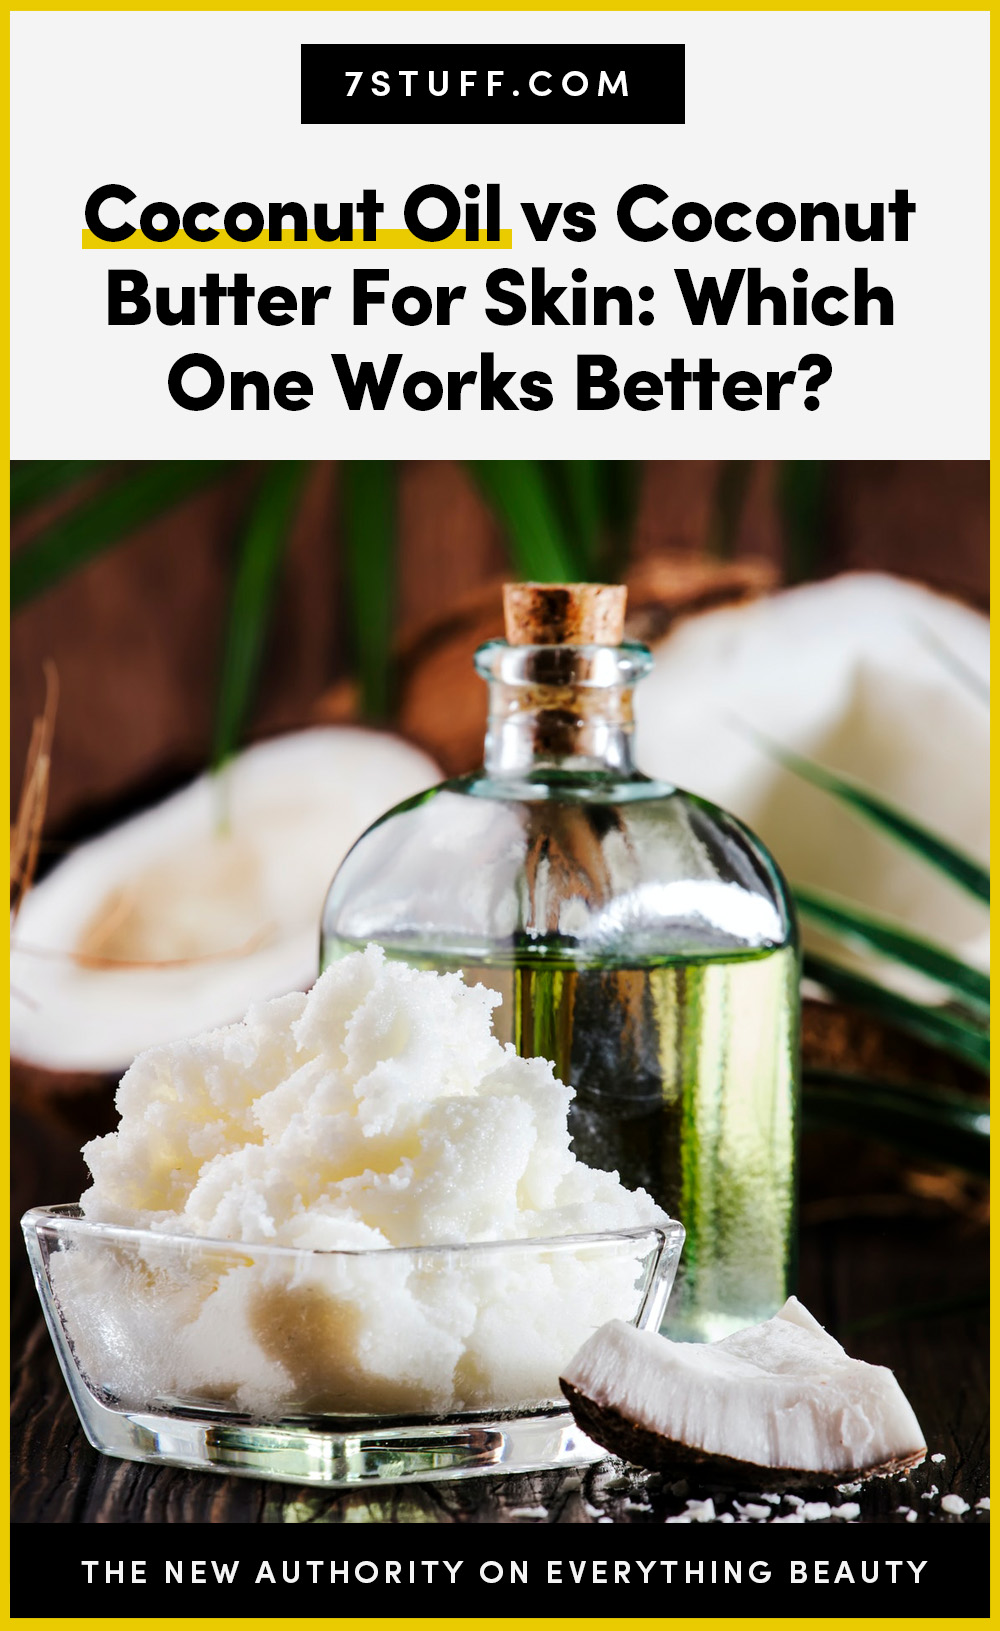 Coconut Oil vs Coconut Butter For Skin: Which One Works Better?